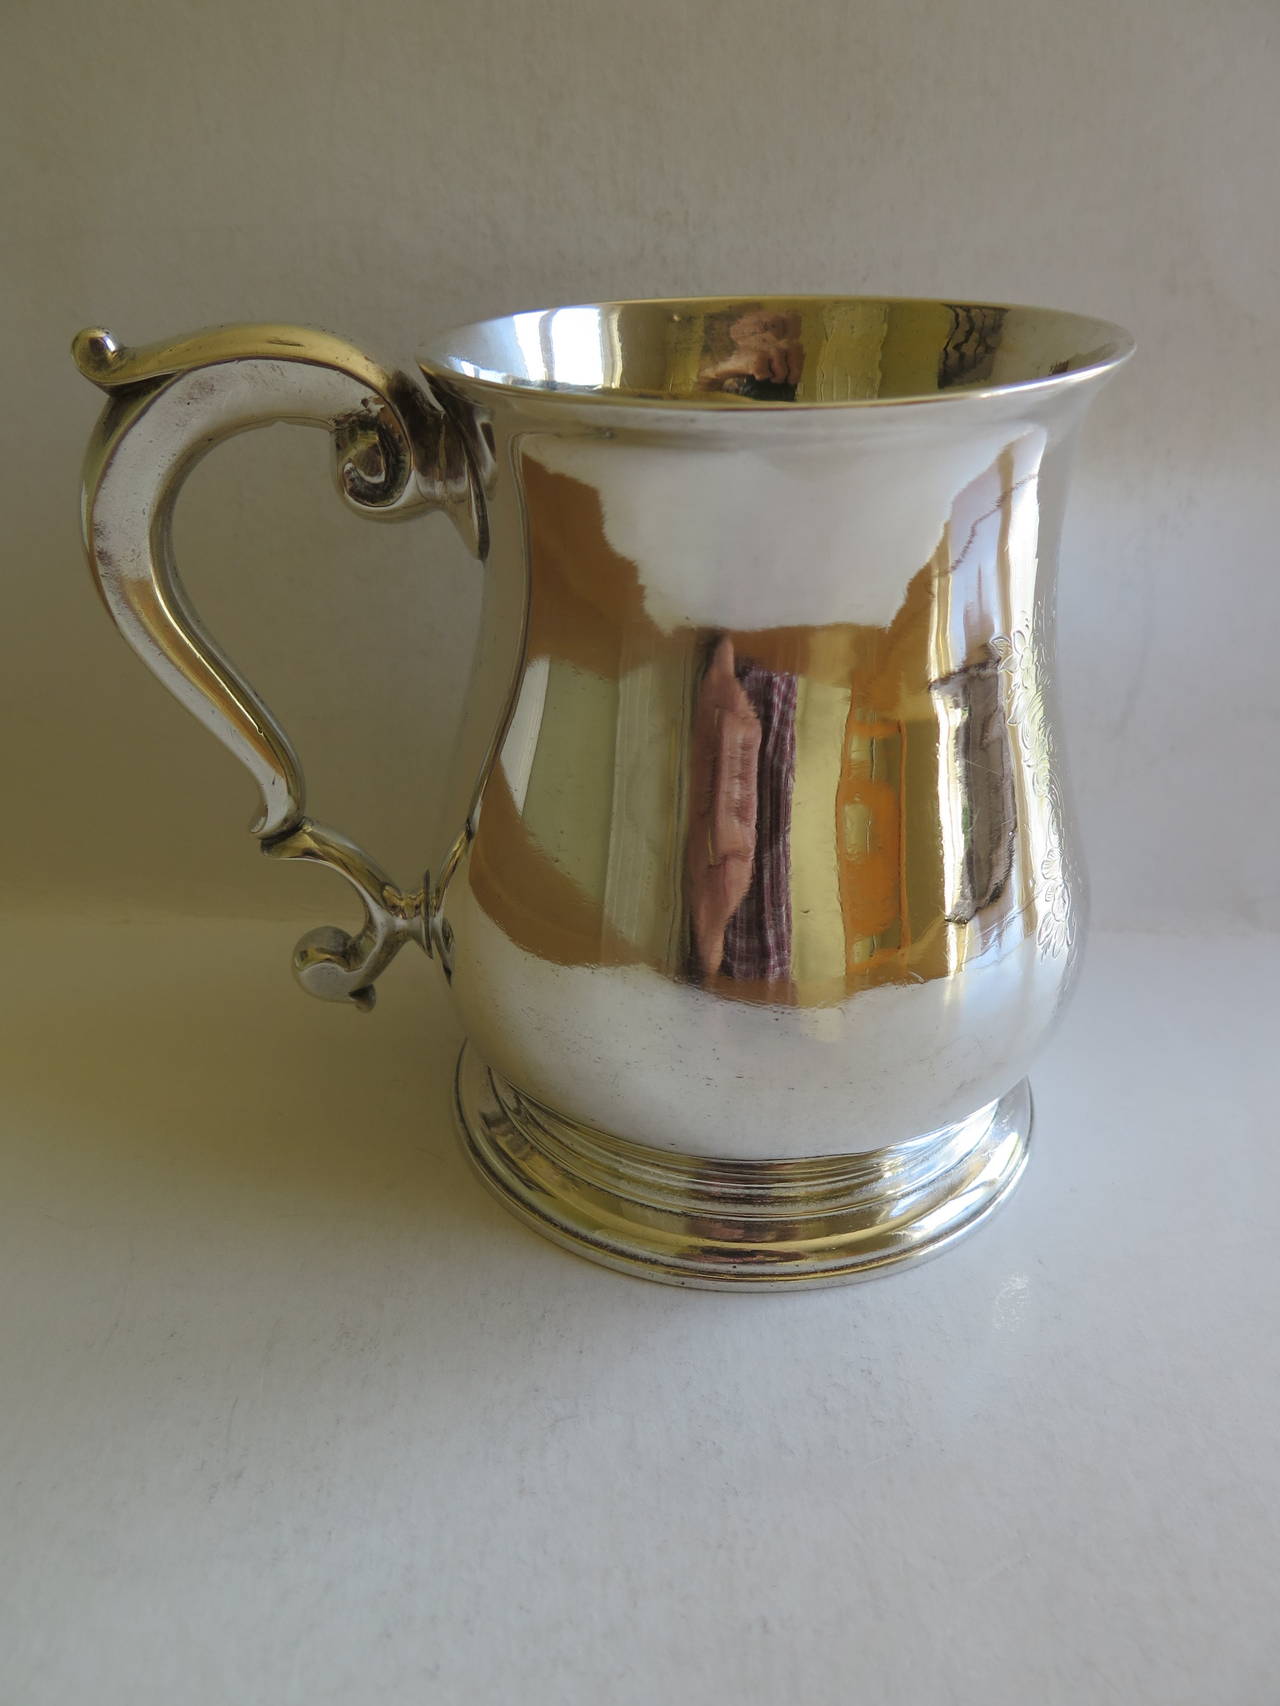 Hand-Crafted 1735, George II, Sterling Silver, Pint Mug or Tankard by Ben Cartwright, London